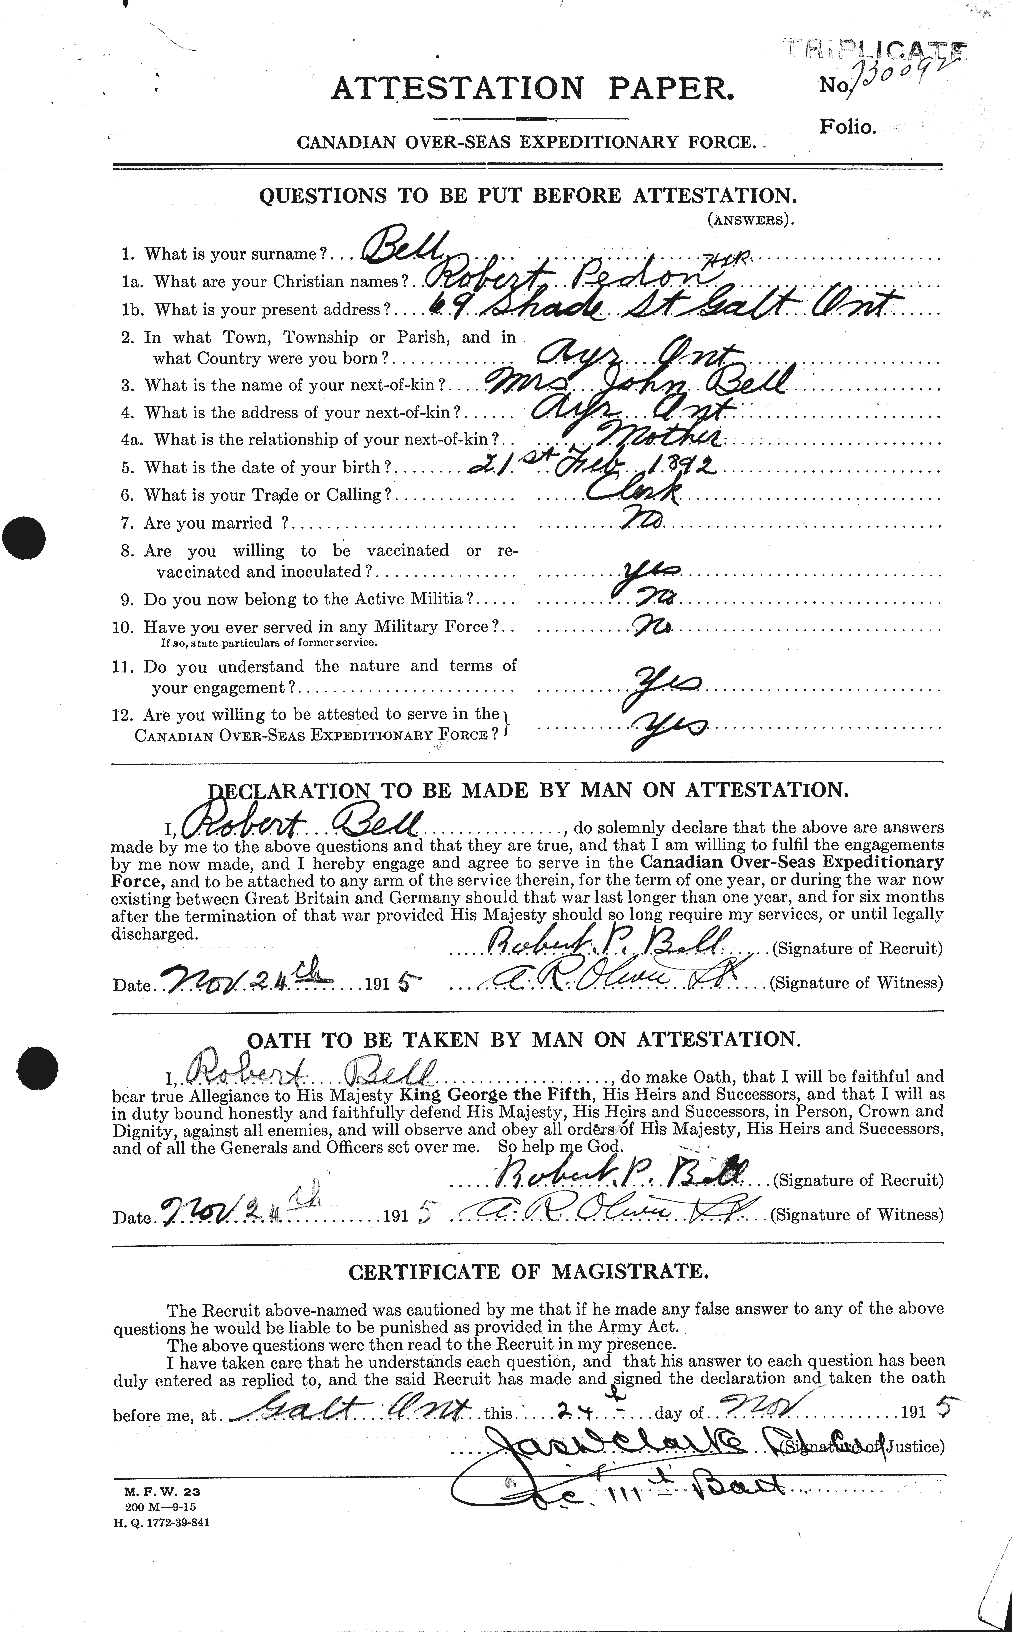 Personnel Records of the First World War - CEF 234688a